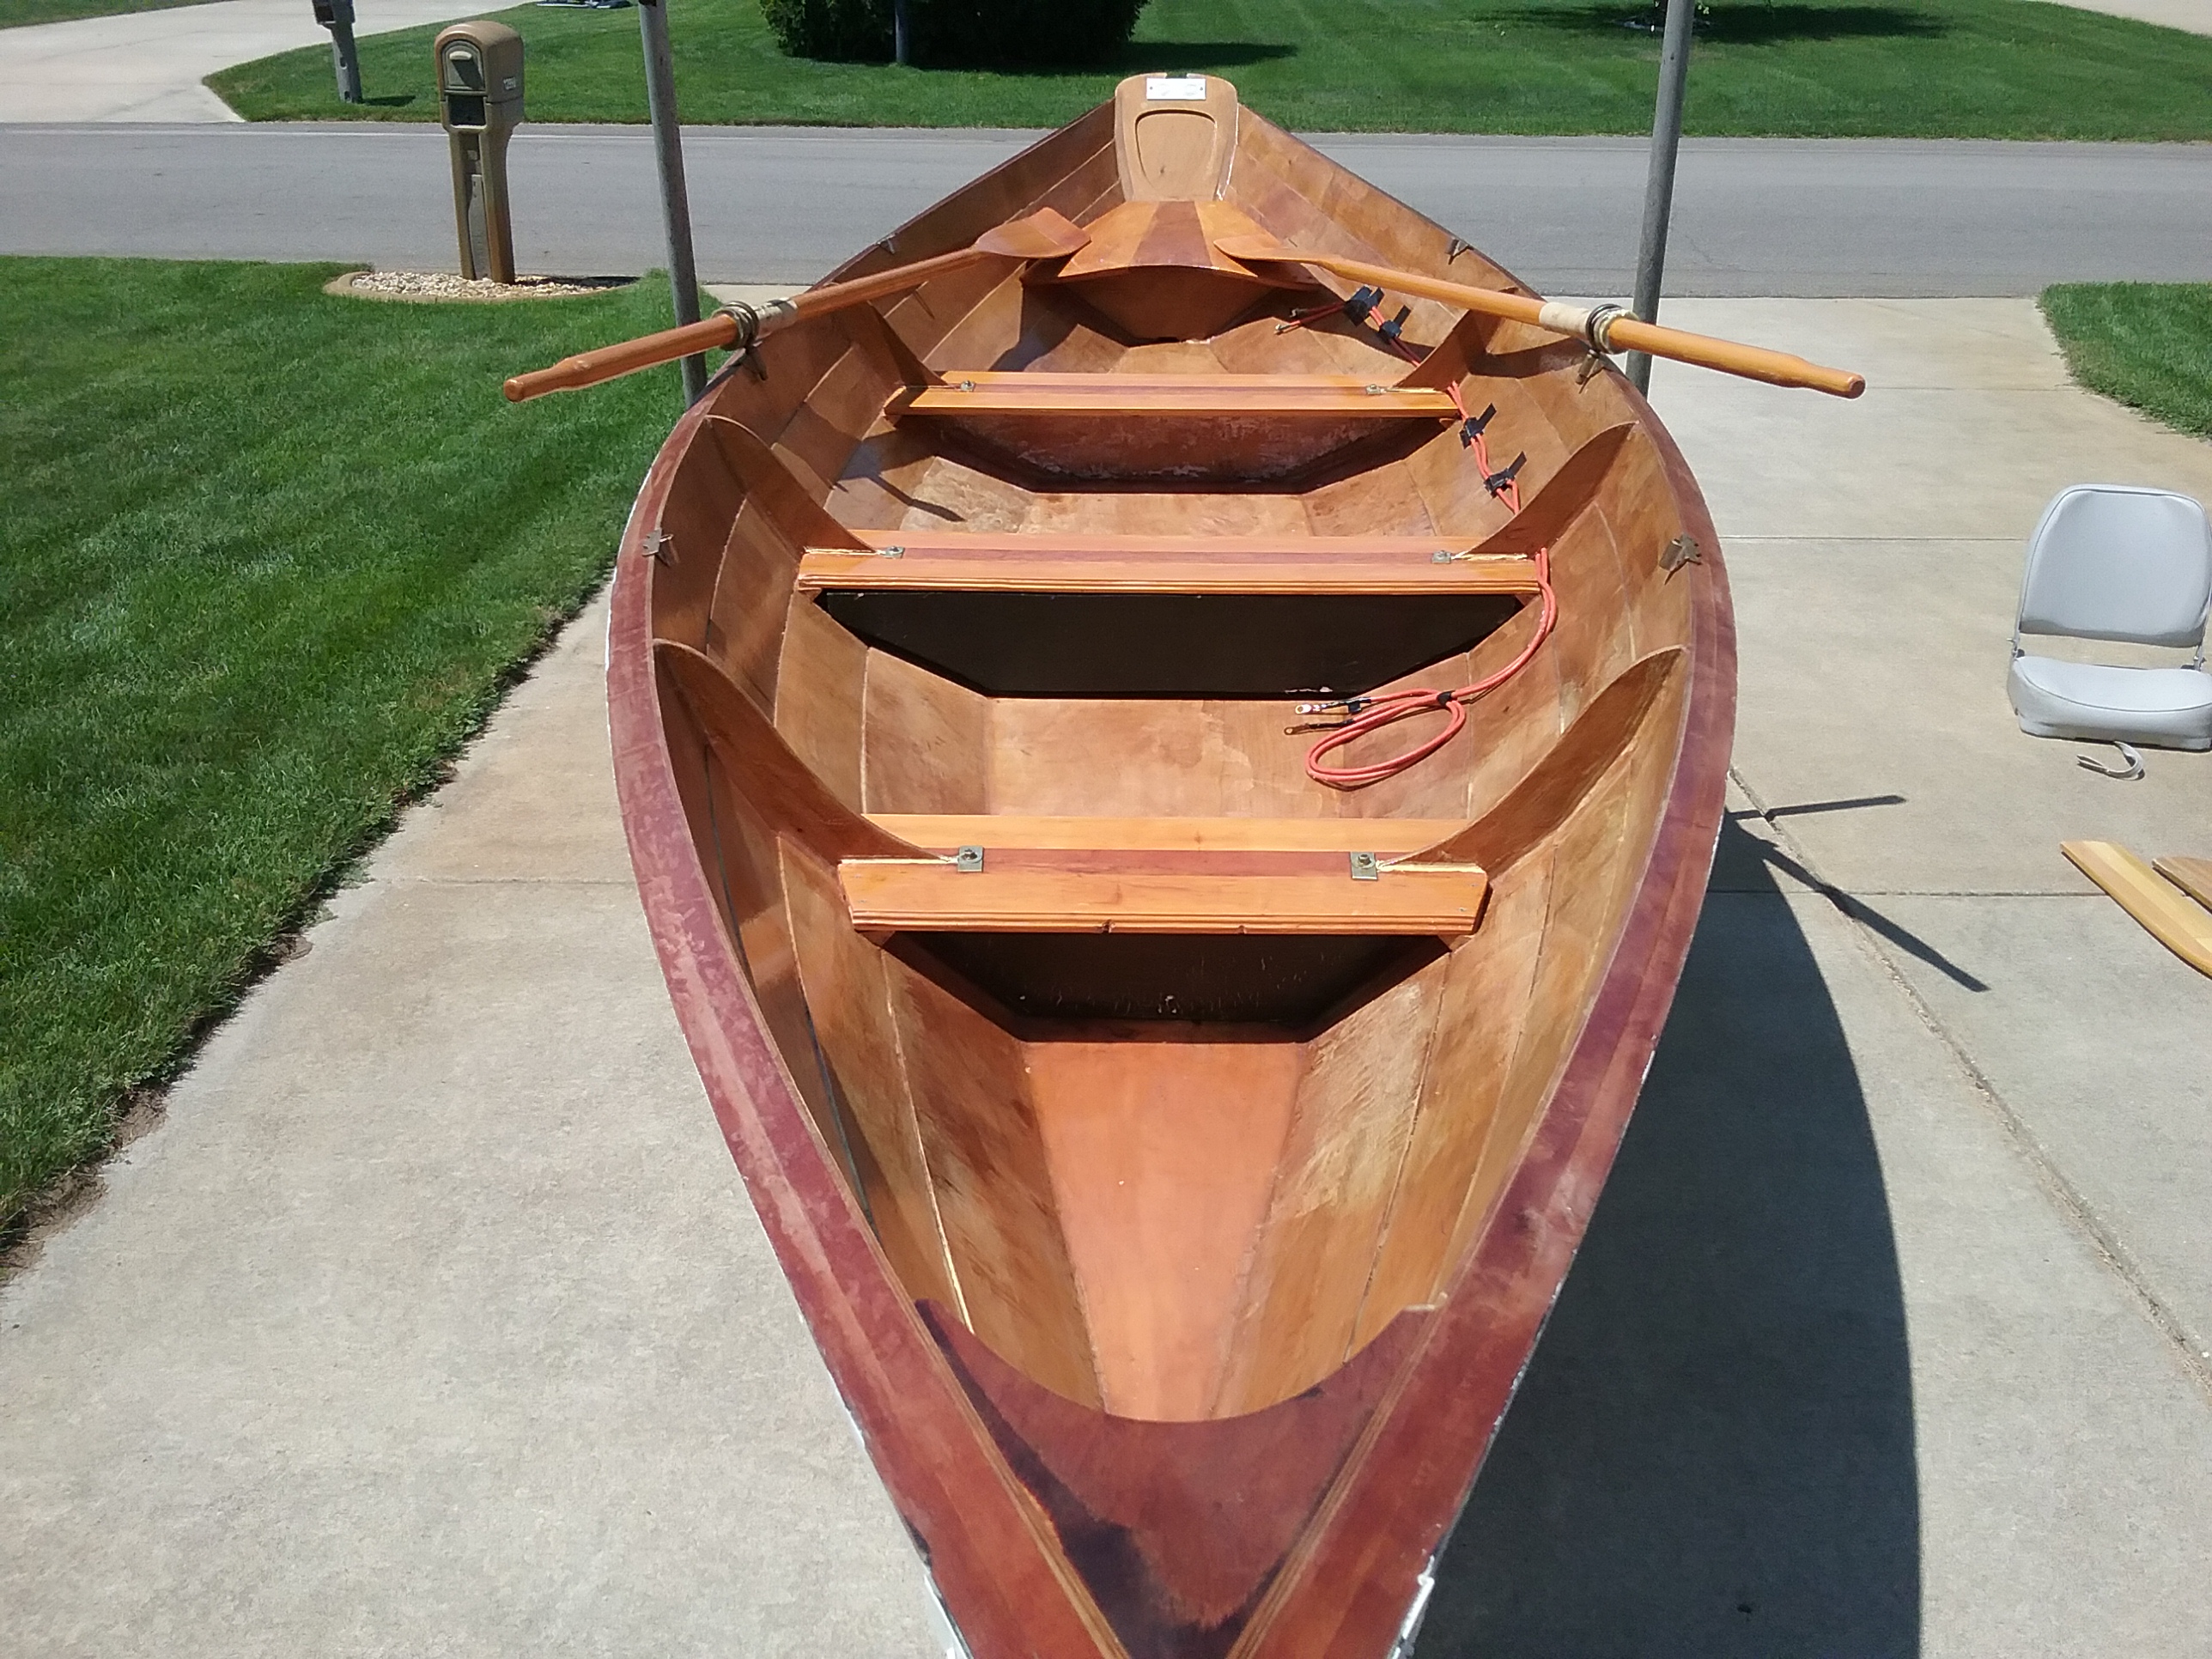 2009 17 foot Chesapeake northeaster dory Rowboat for sale in Grand Haven, MI - image 11 